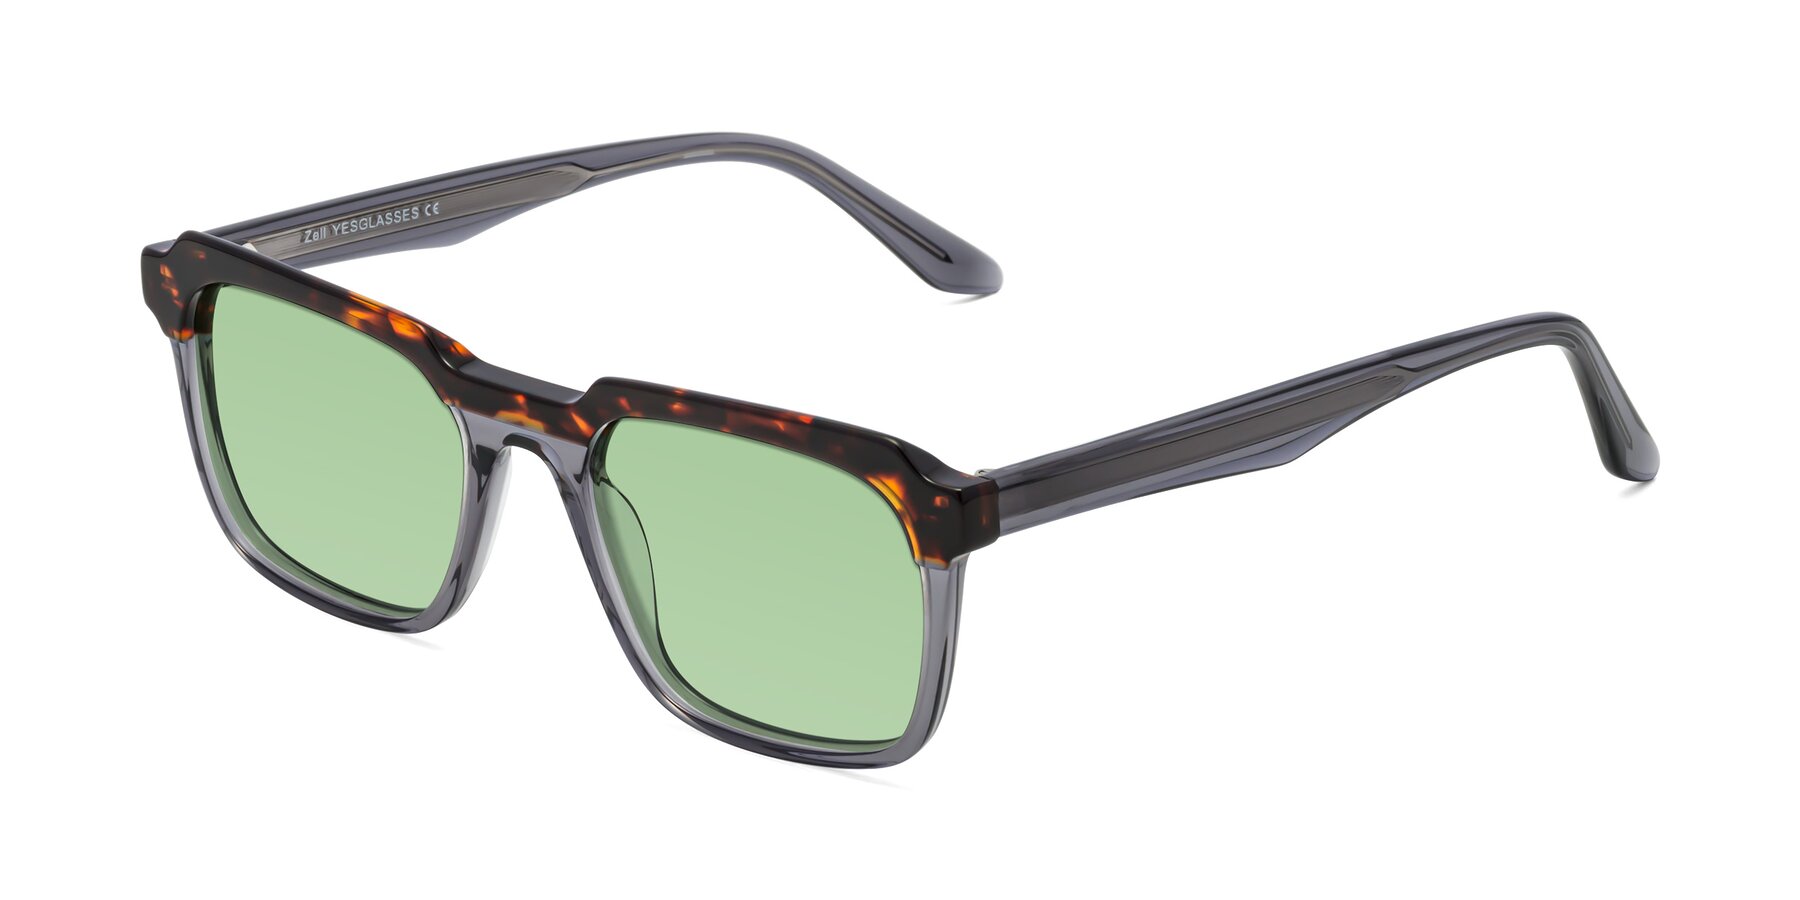 Angle of Zell in Tortoise/Gray with Medium Green Tinted Lenses